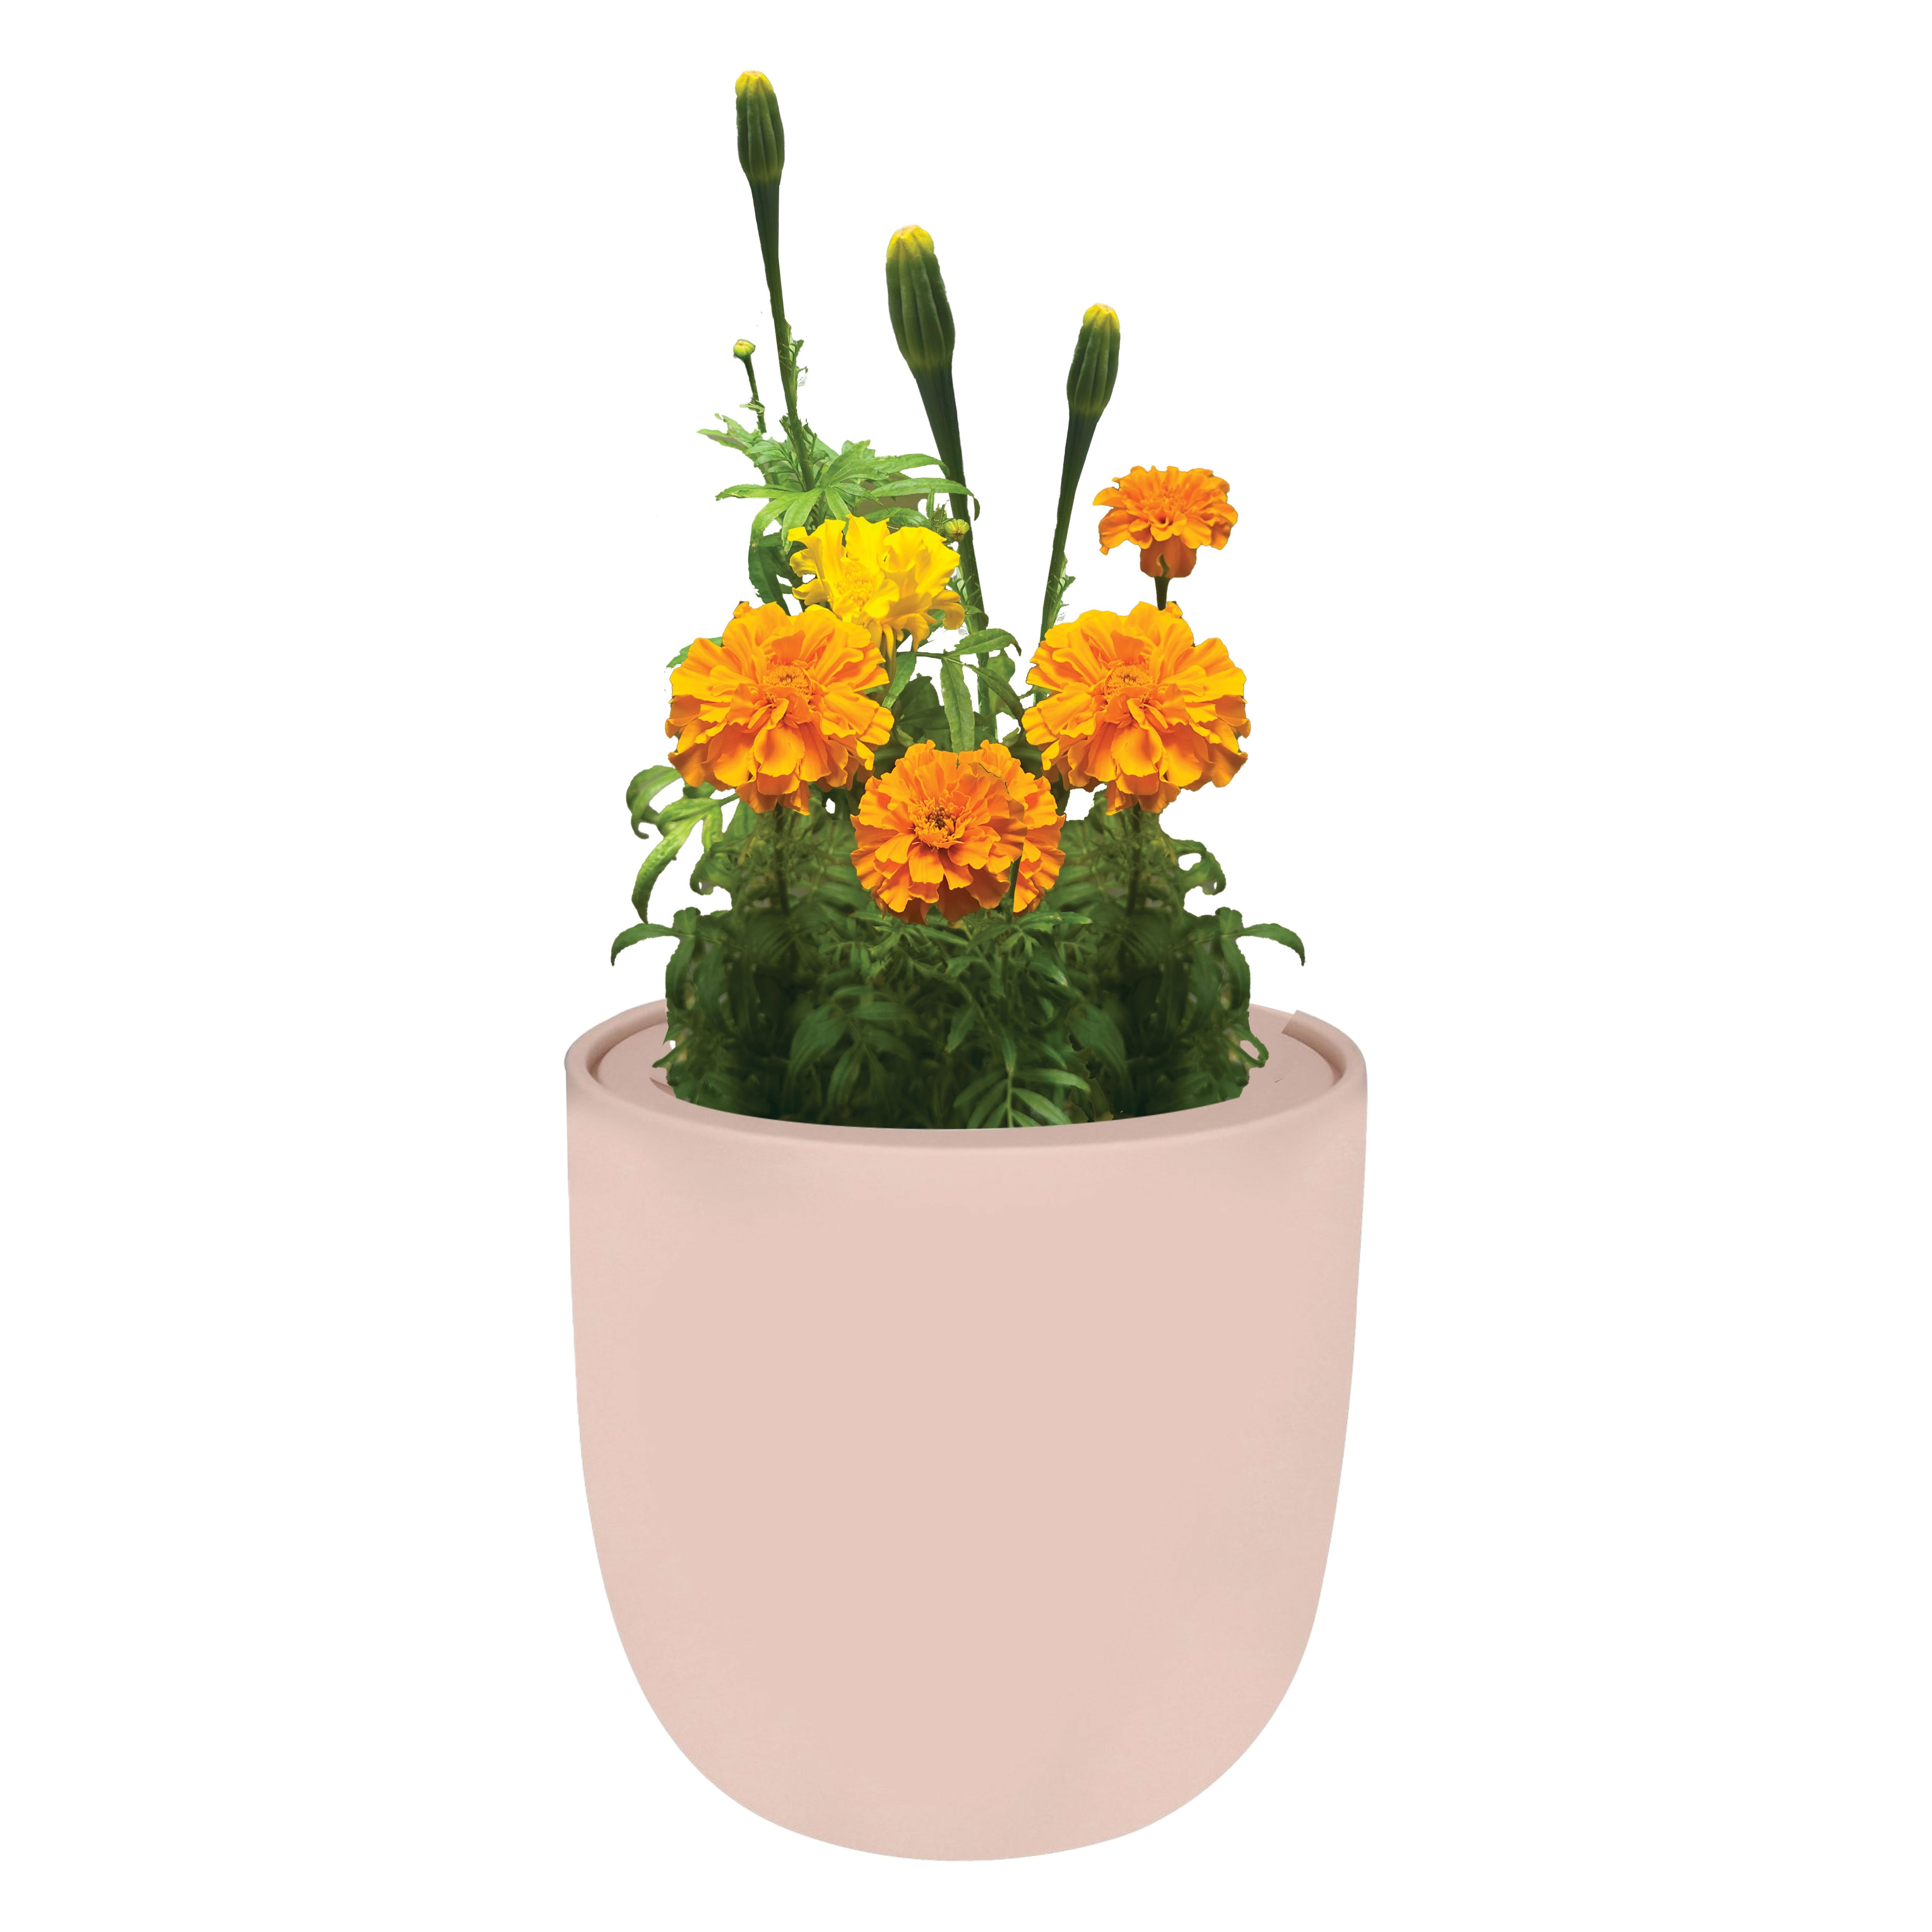 Marigold Pink Ceramic Pot Hydroponic Growing Kit with Seeds